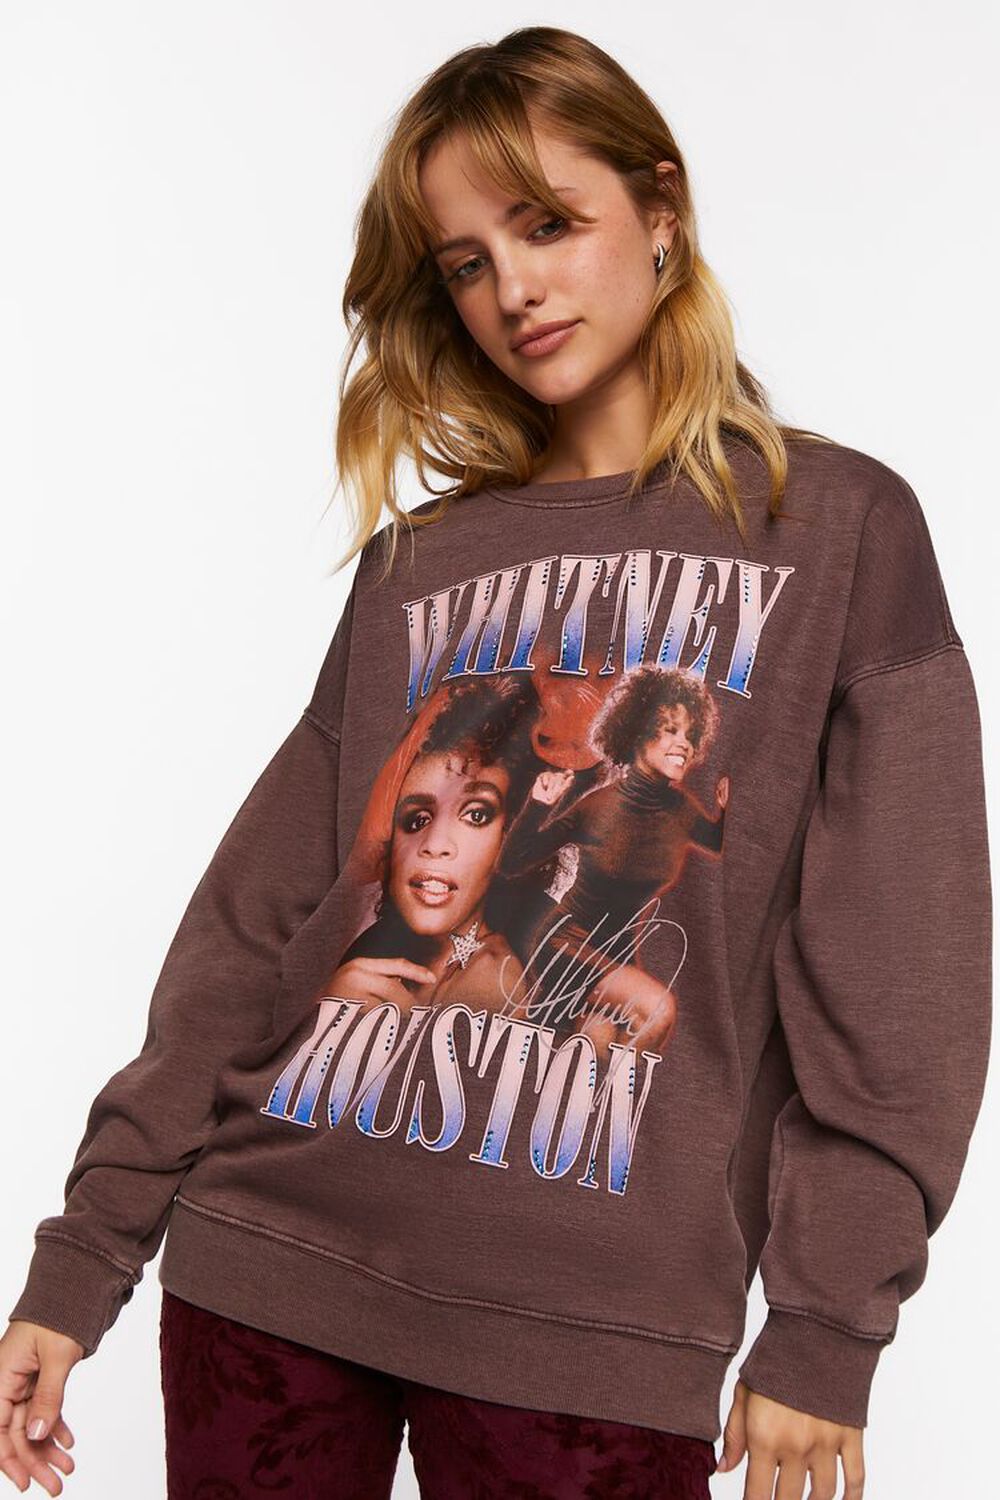 BROWN/MULTI Oversized Whitney Houston Graphic Pullover, image 1